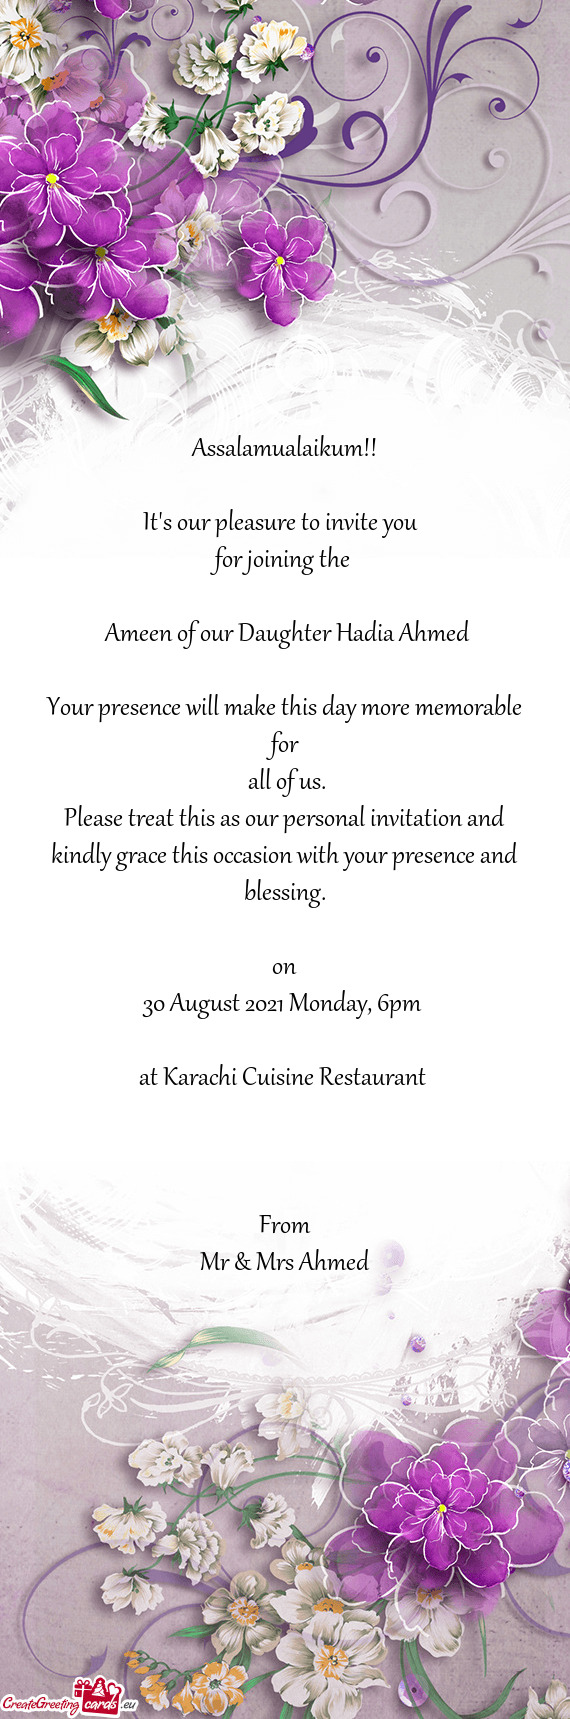 Ameen of our Daughter Hadia Ahmed